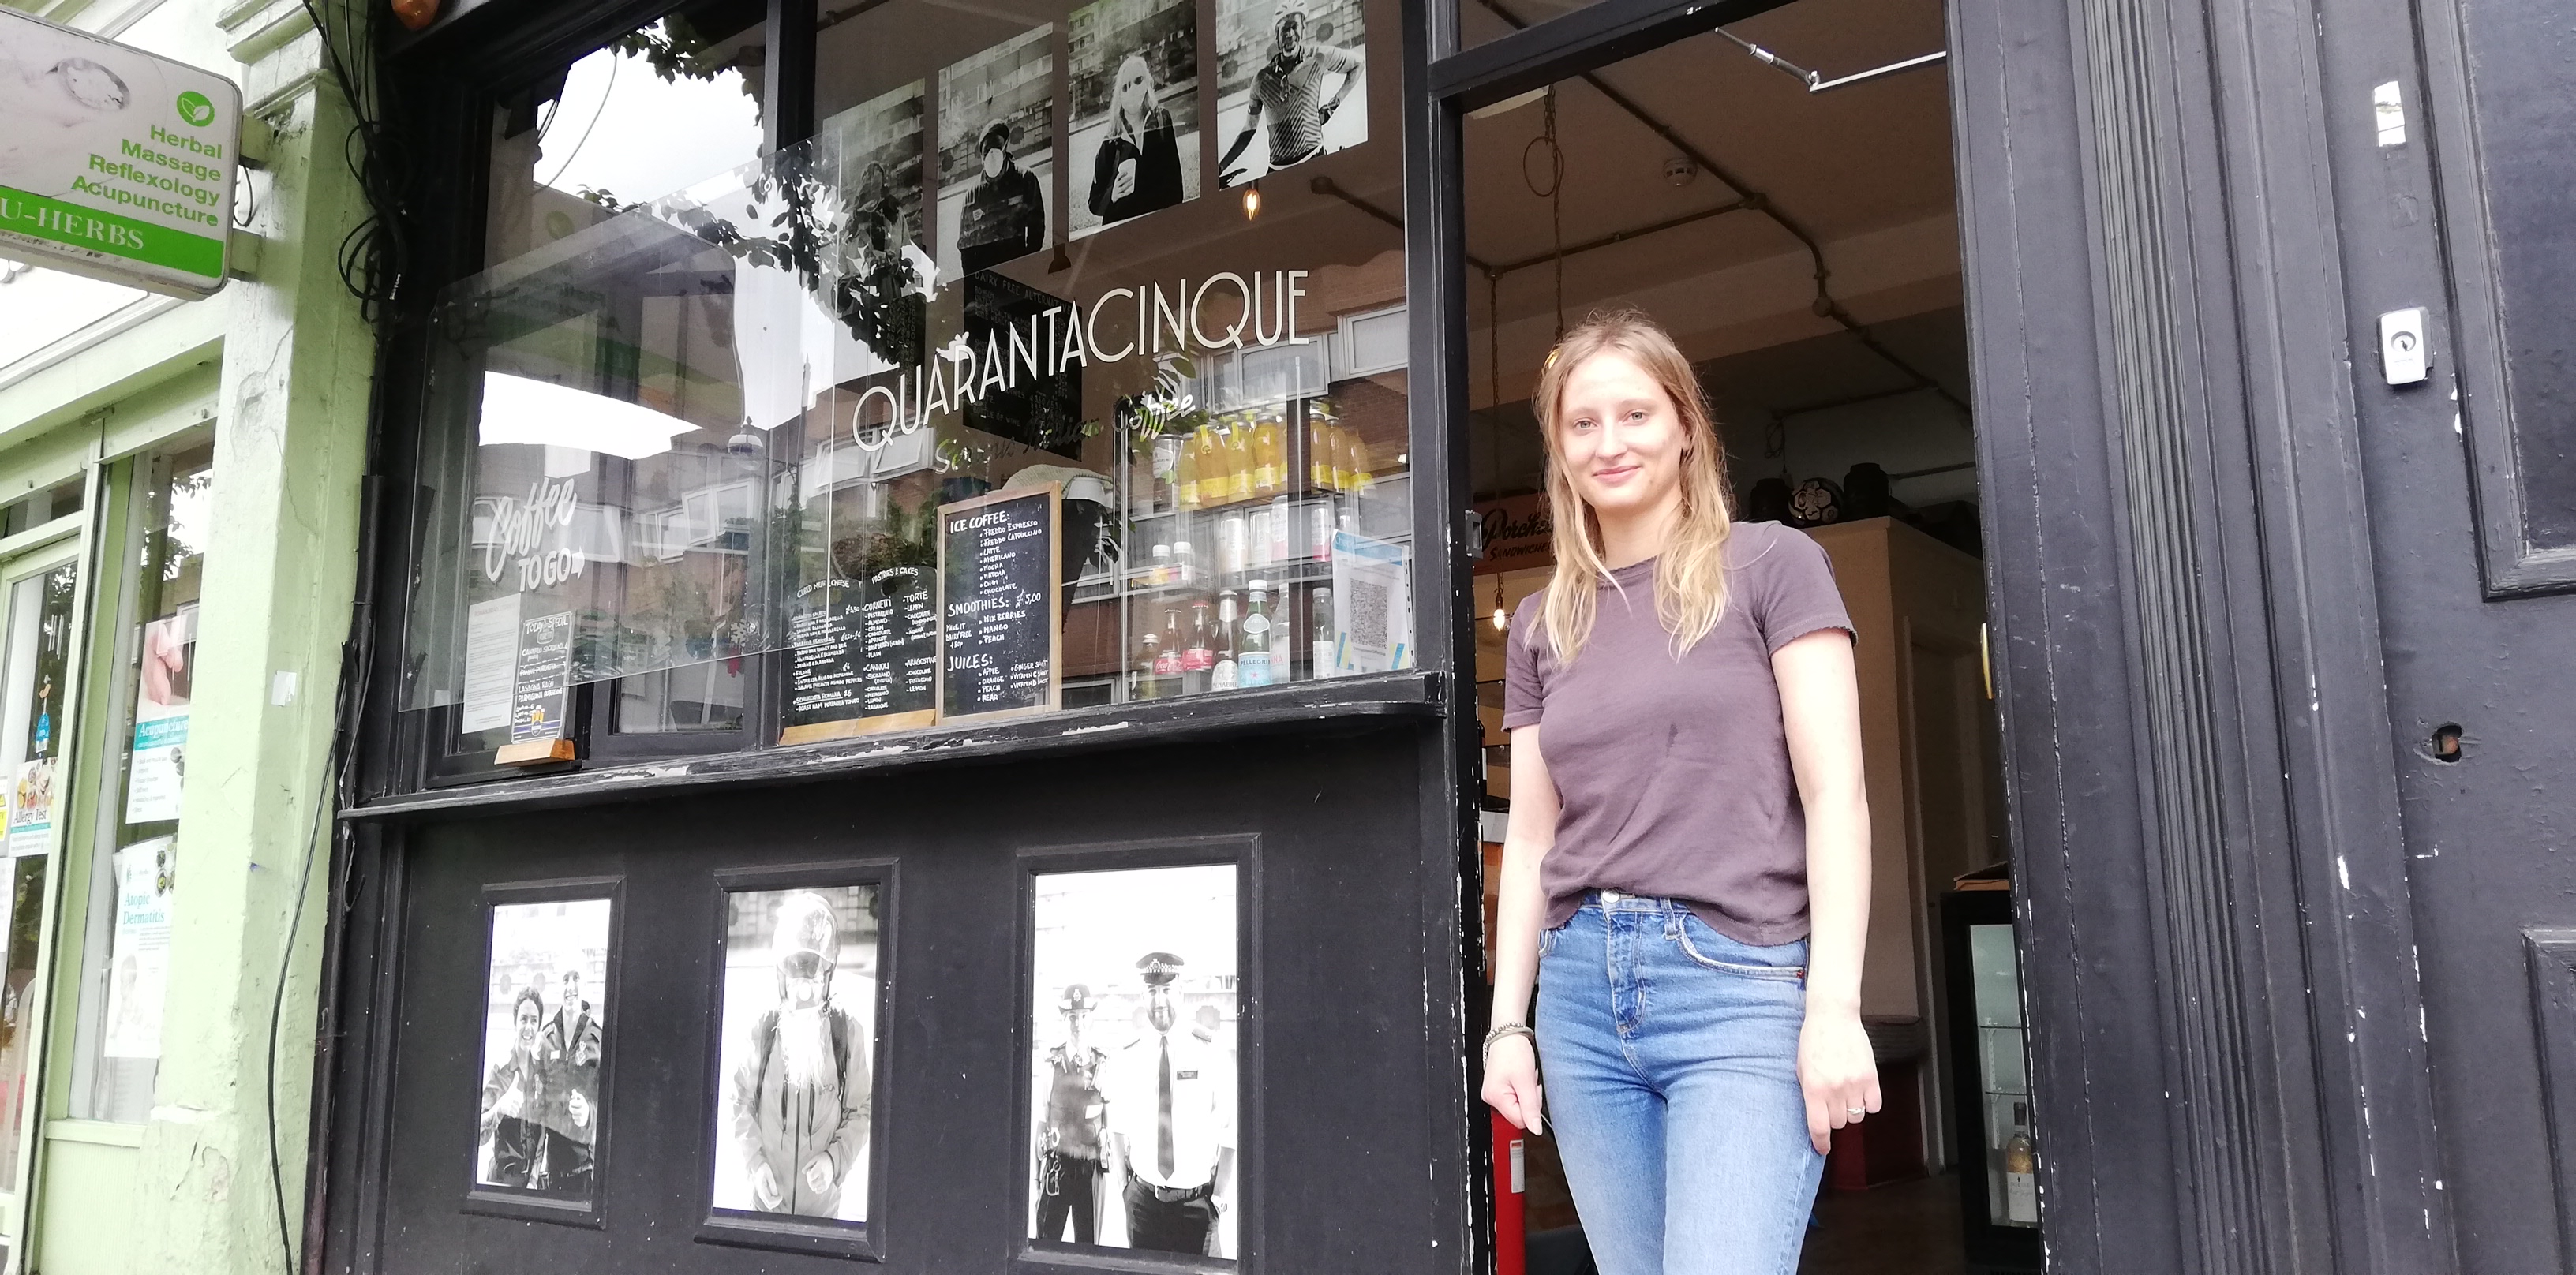 A woman smiles in the doorway of a coffee shop. There are large black and white prints displayed on the front of the building. 